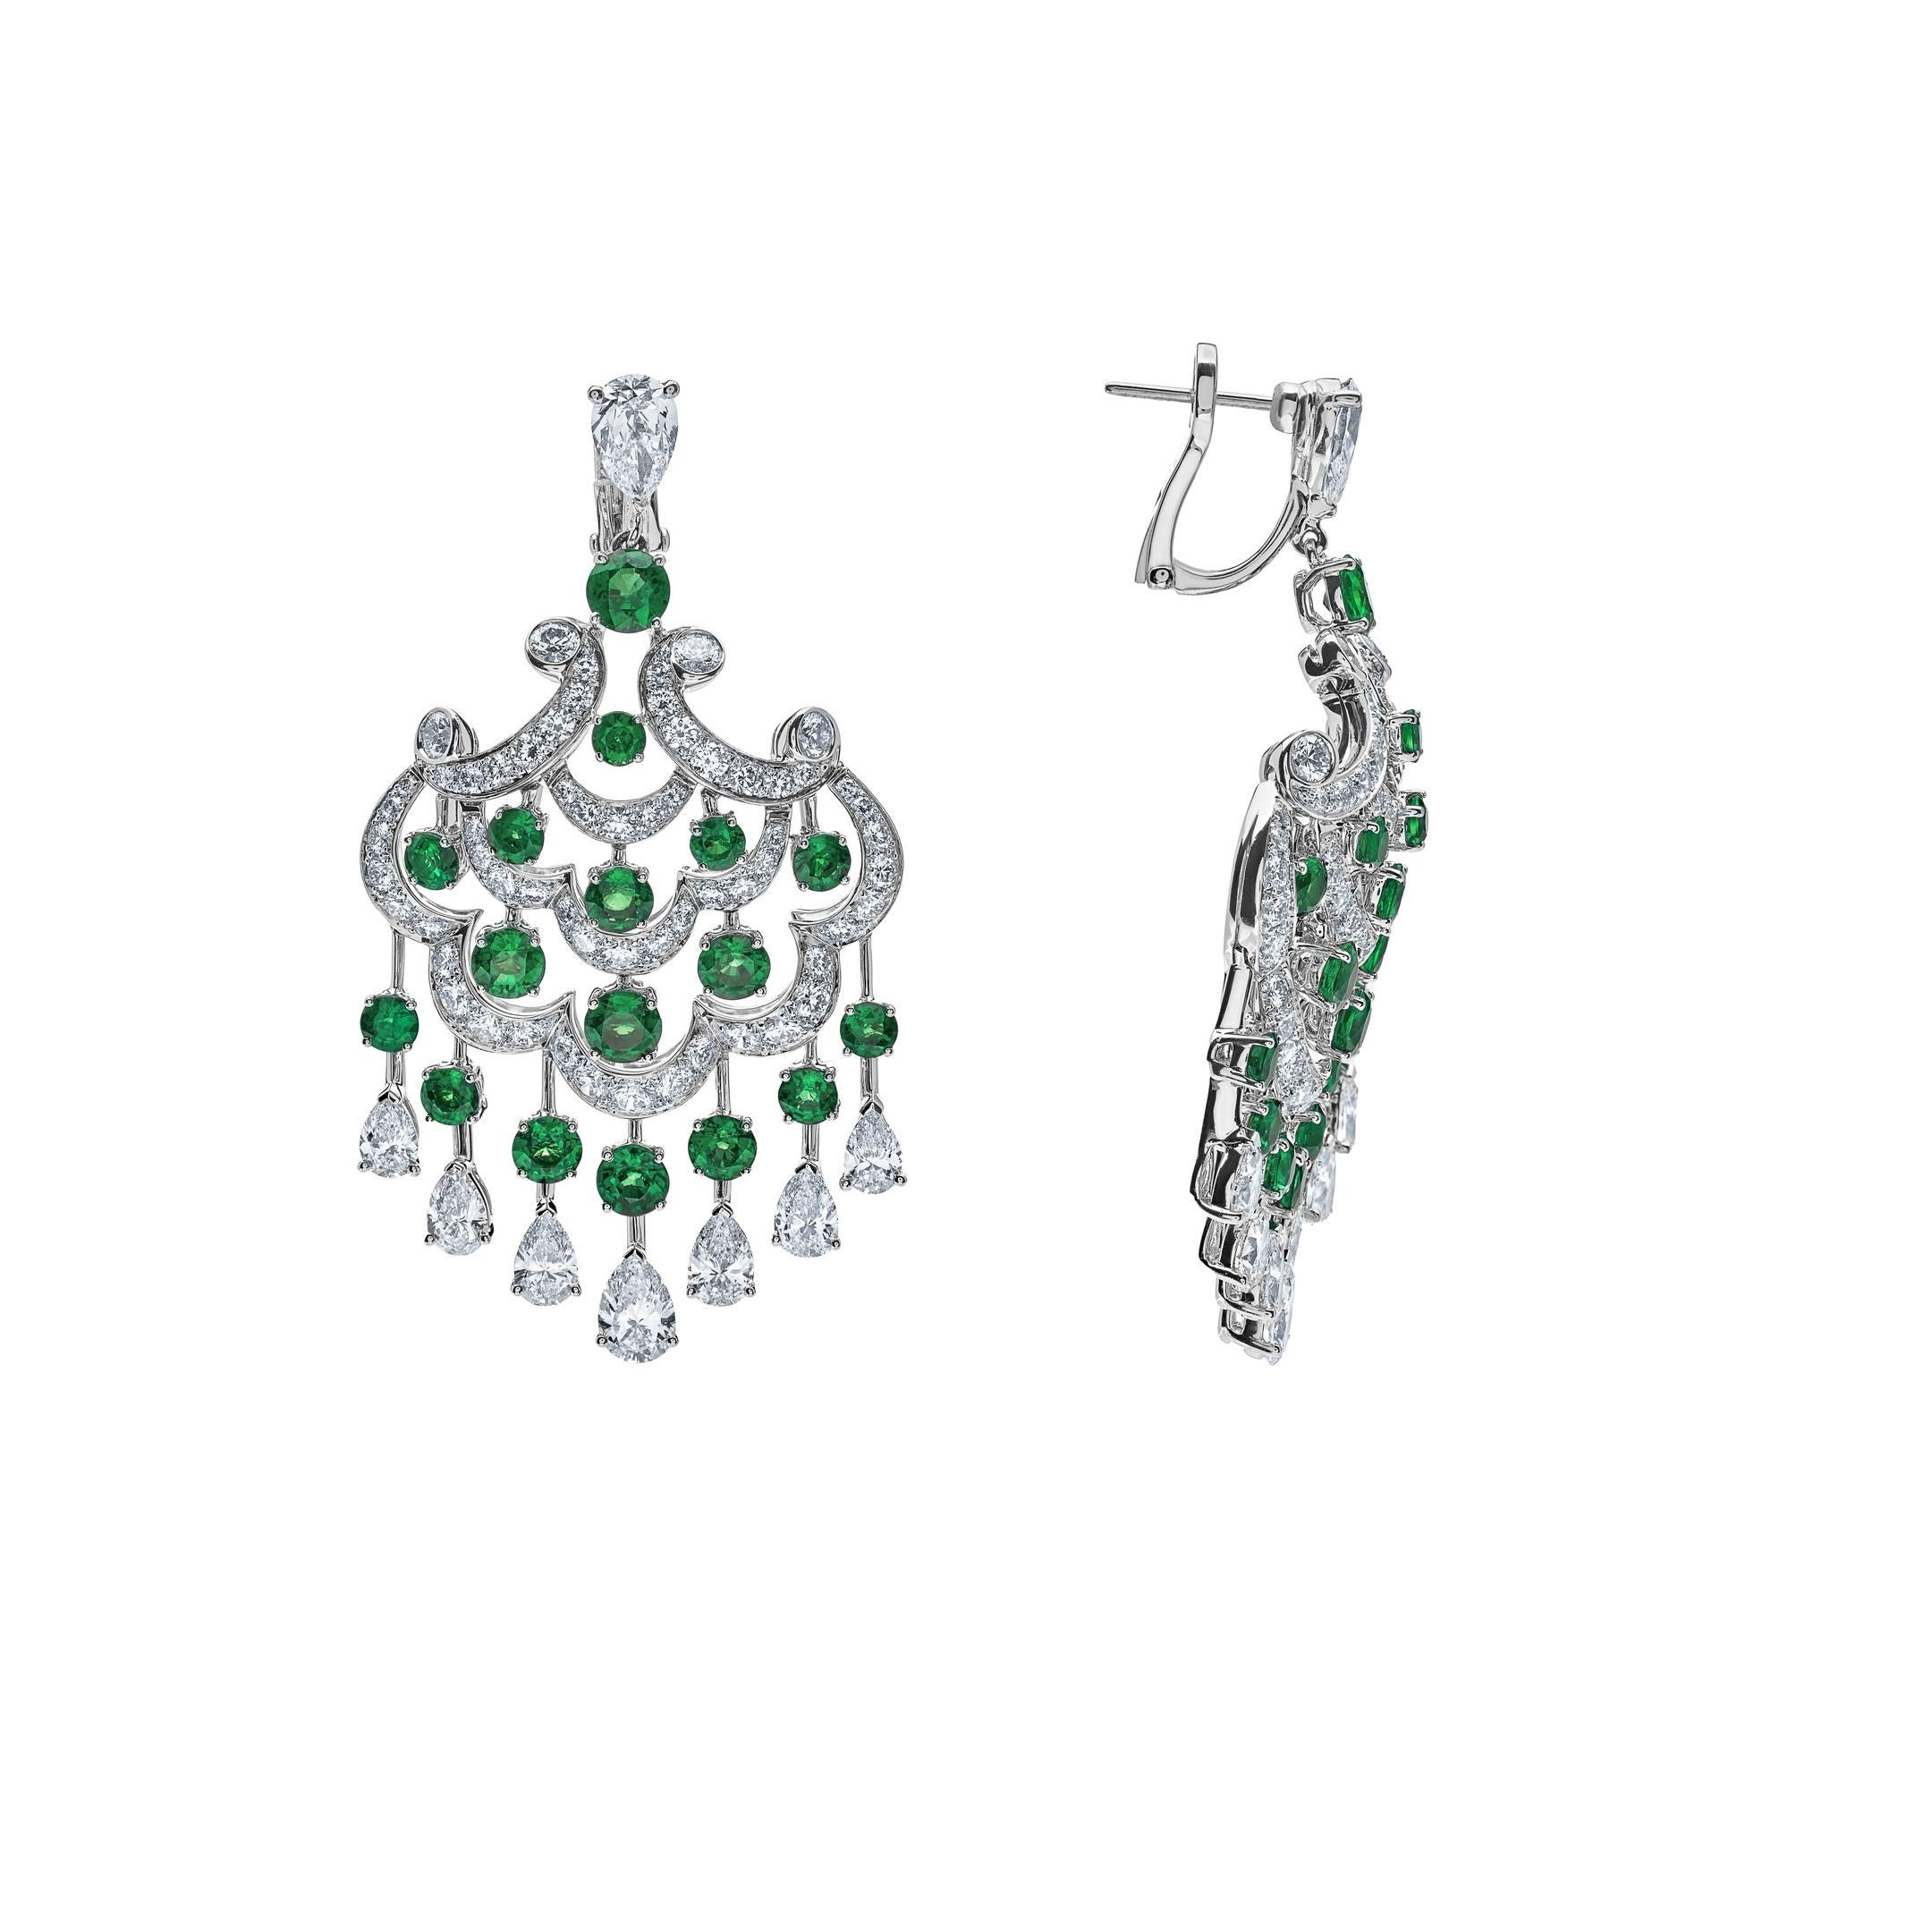 Immerse yourself in the elegance of this exquisite chandelier design of emerald and diamond earrings. The Graff earrings feature a stunning array of round emeralds and 16 pear-shaped white diamonds in lustrous 18-karat white gold. The elaborate